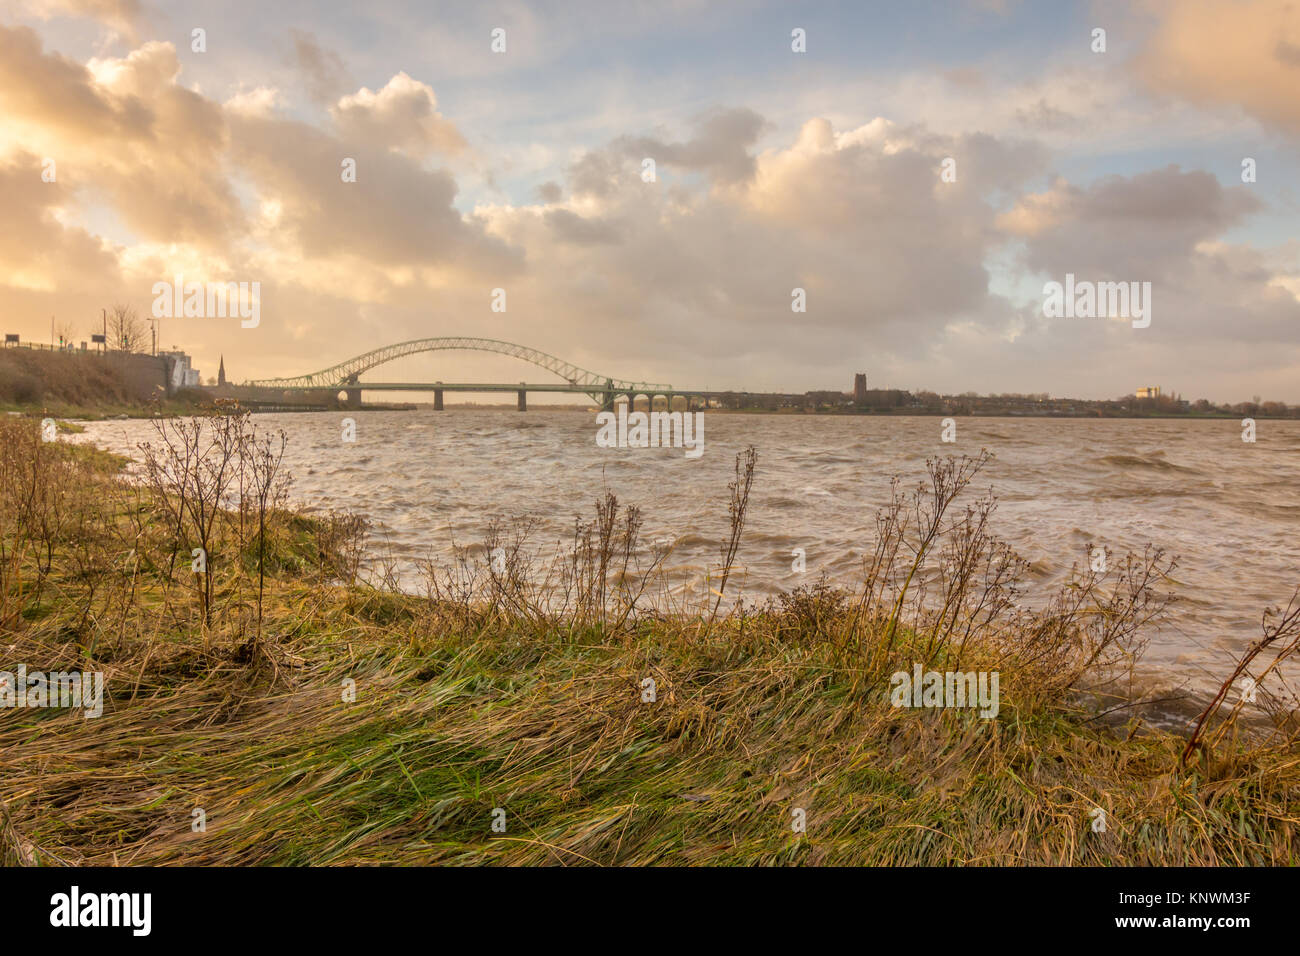 Looking out across the River Mersey at the old Runcorn Silver Jubilee Bridge and the new Mersey Gateway Bridge Stock Photo